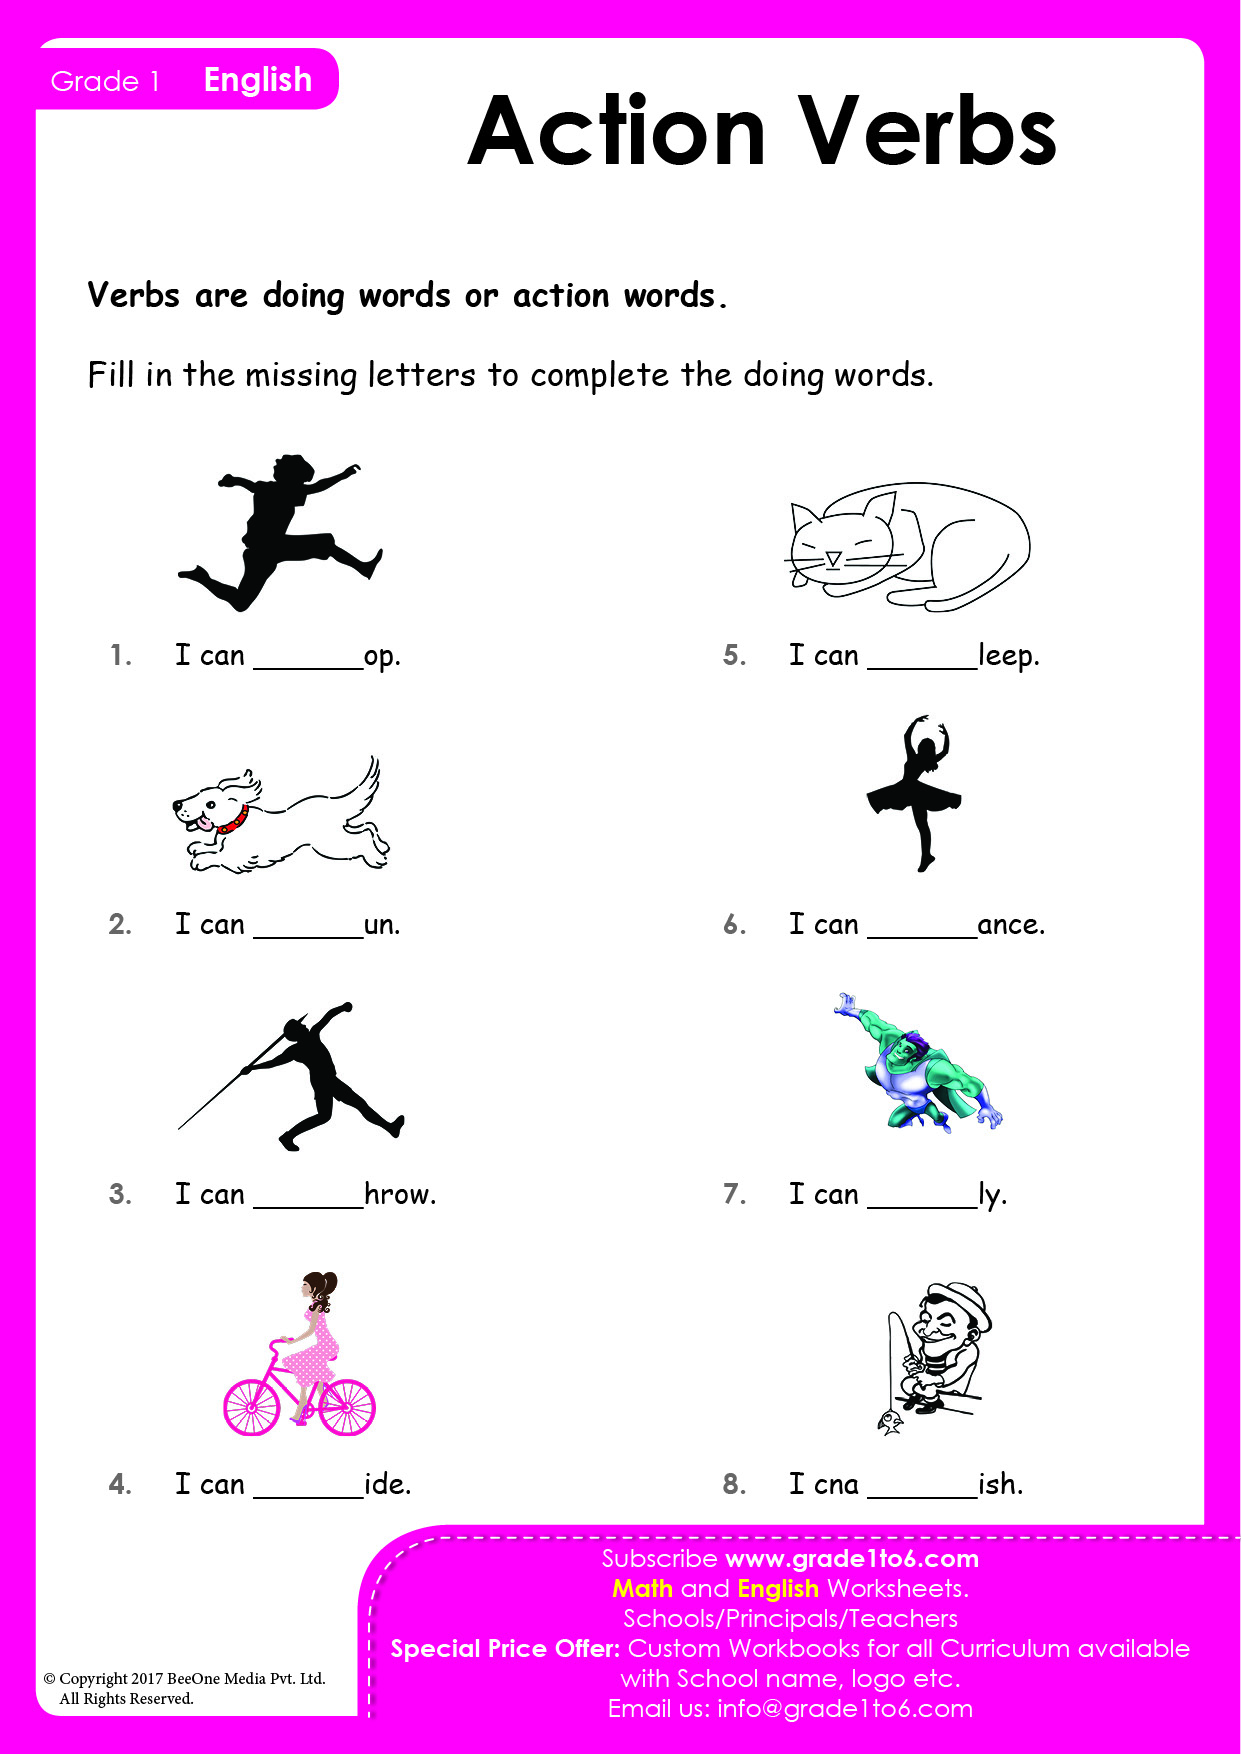 Worksheet On Action Words For Class 2